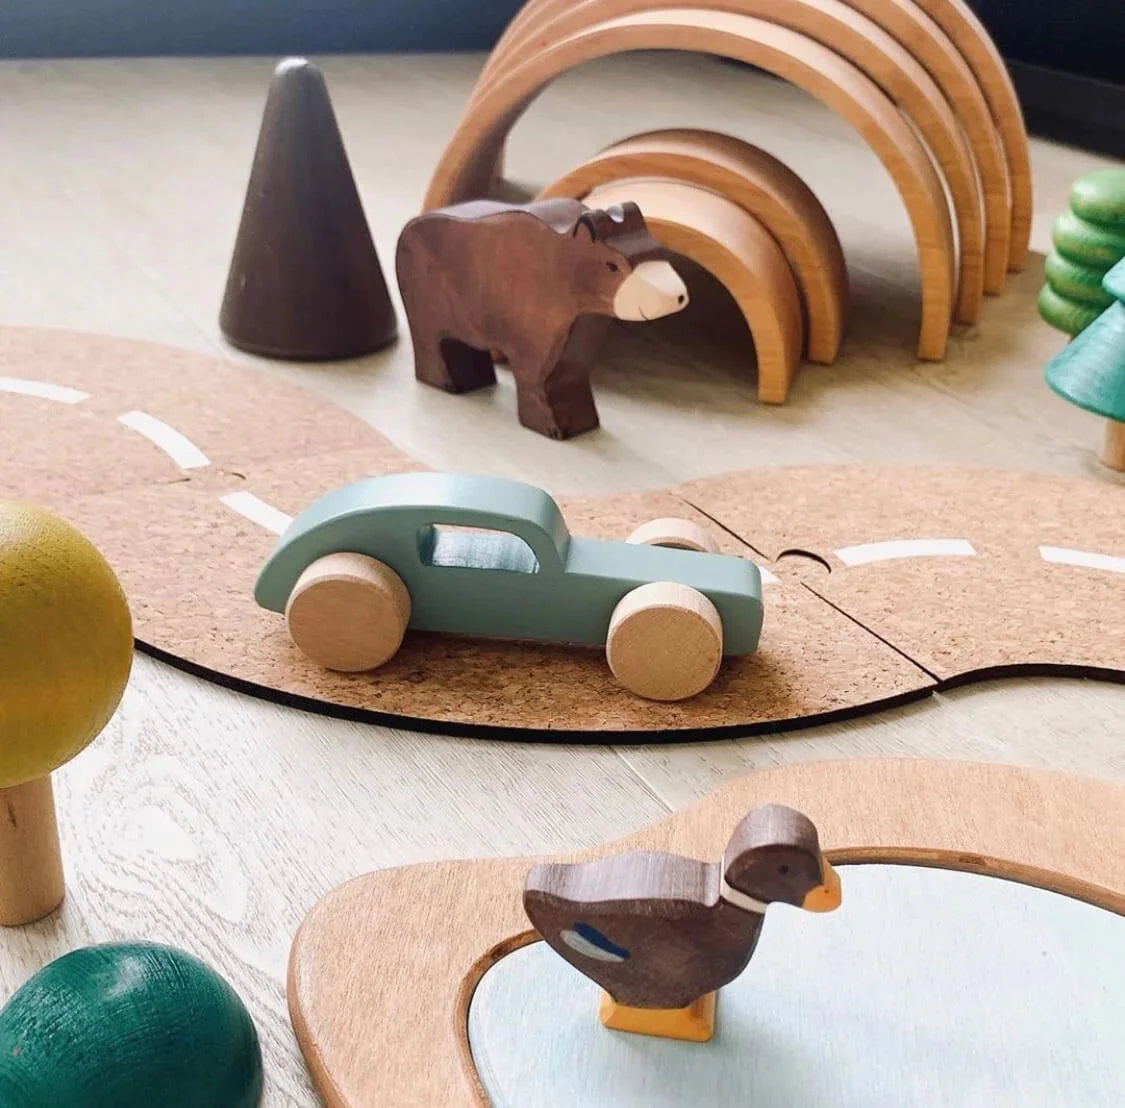 Cruisin’ Cork Road, Introducing the Cruising Cork Road, an innovative and versatile toy that allows children to create their very own road tracks and embark on exciting adventures with their favorite toys and vehicles. This 17 piece cork road mat set provides endless possibilities for imaginative play and problem-solving.Like a giant puzzle, children will use their problem-solving skills to fit the pieces together and connect them as a circuit for their vehicles to drive on. As they build and design their o